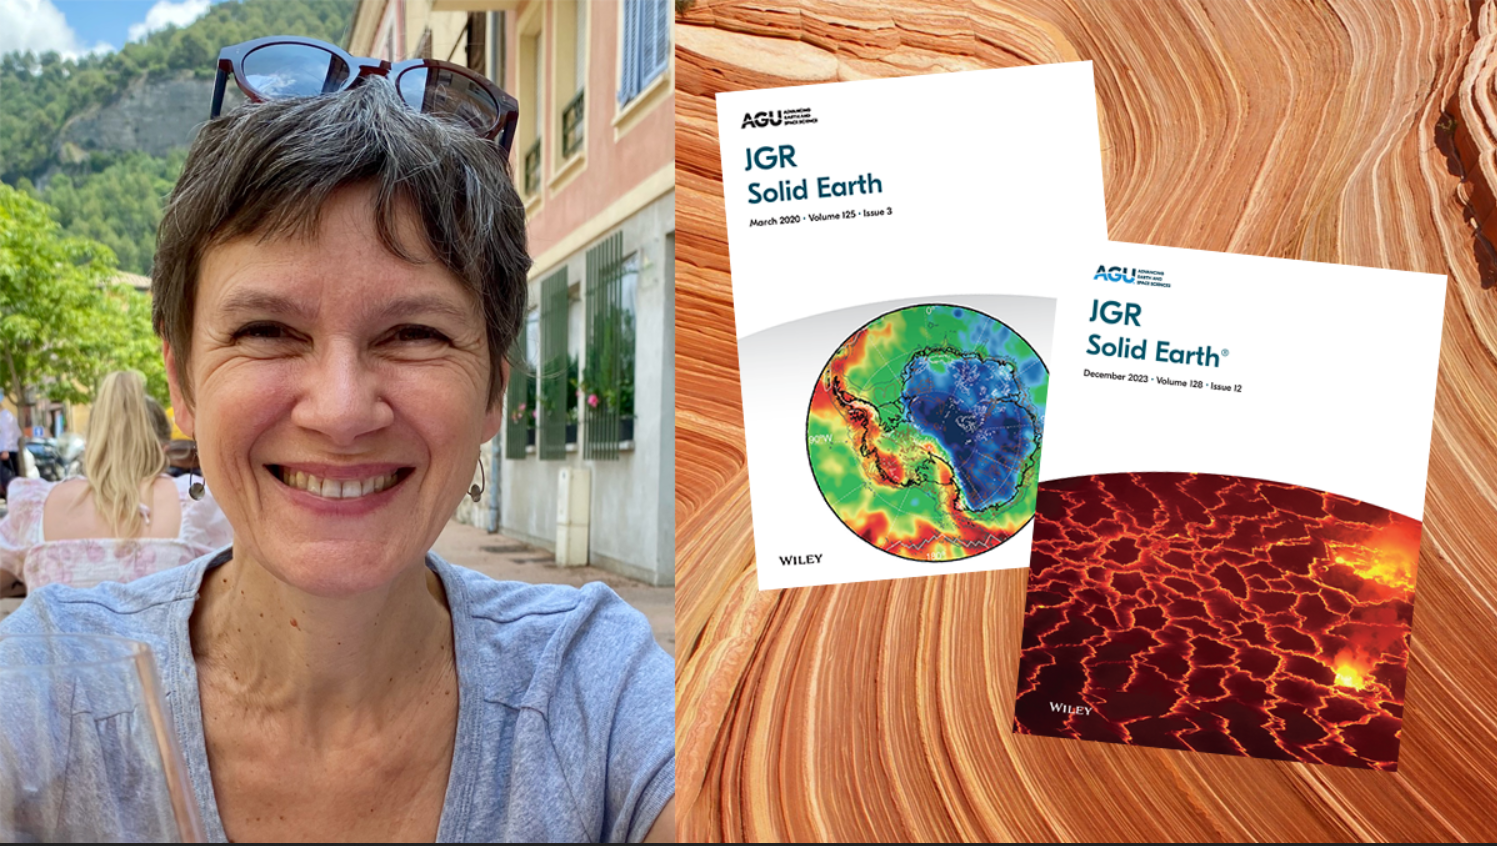 Isabelle Manighetti is the outgoing Editor-in-Chief of JGR: Solid Earth. The journal covers are from the March 2020 and December 2023 issues. Background photo credit: Steve Arrington, Unsplash